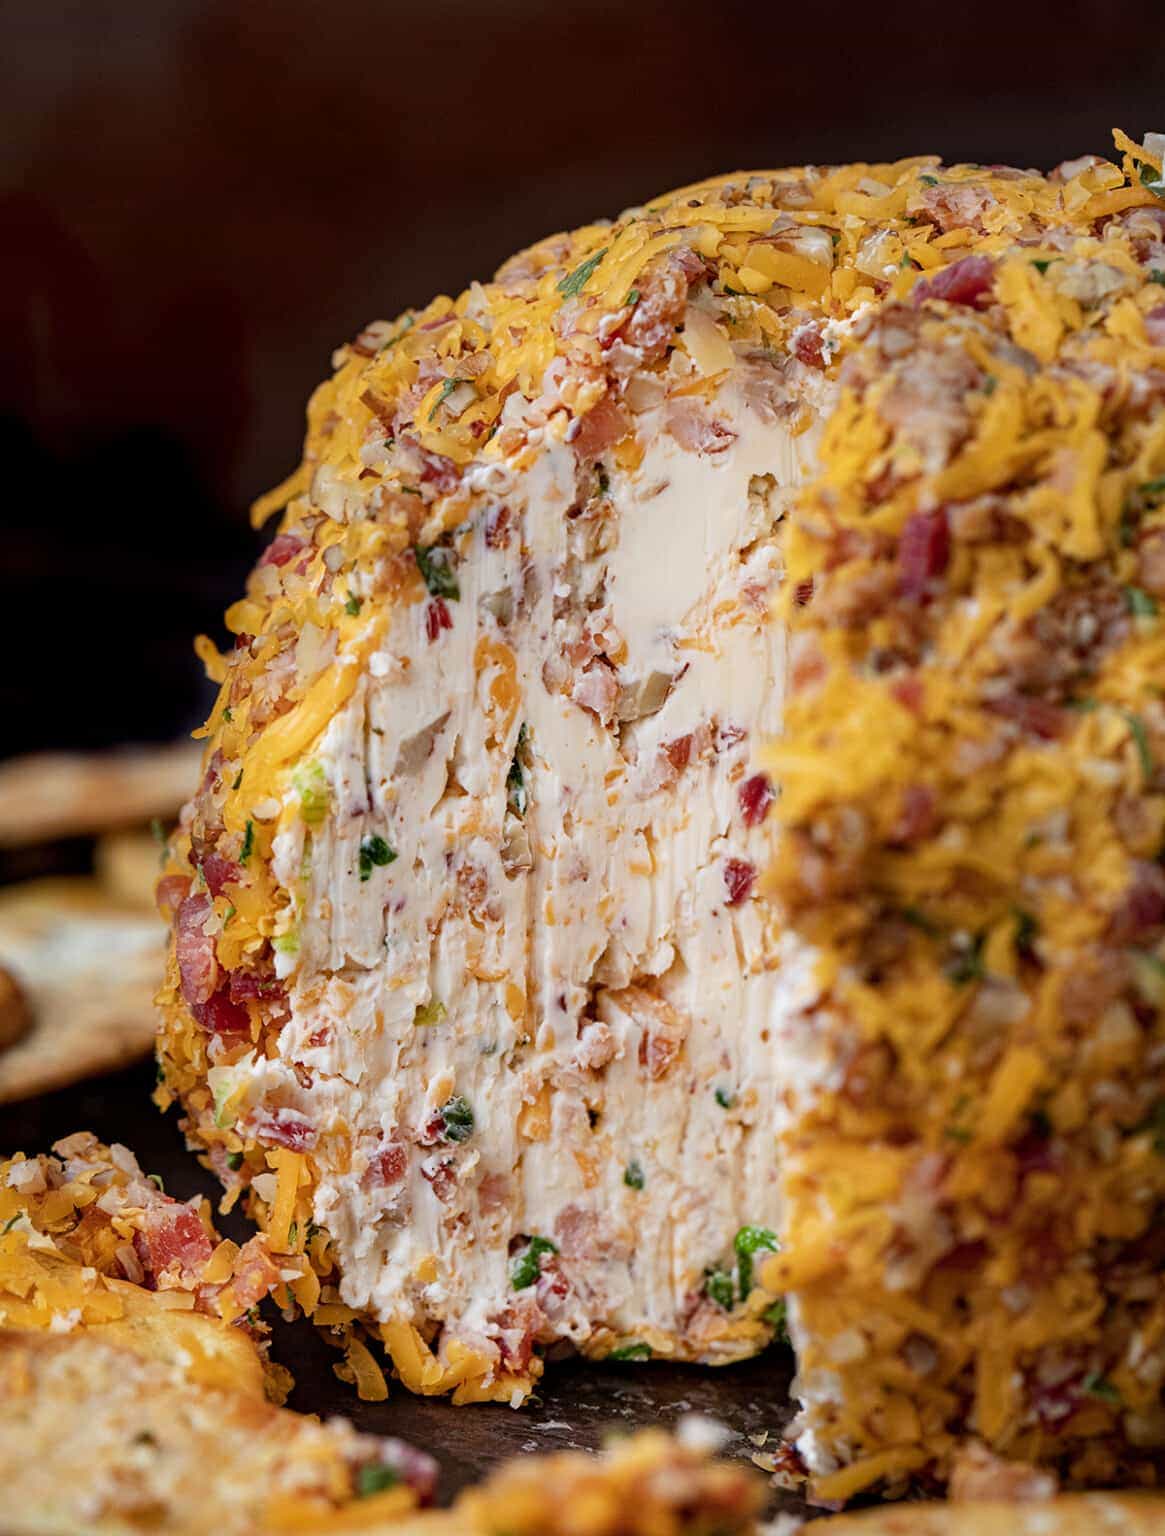 A Unique Bacon Cheese Ball Extravaganza for Your Festive Gathering